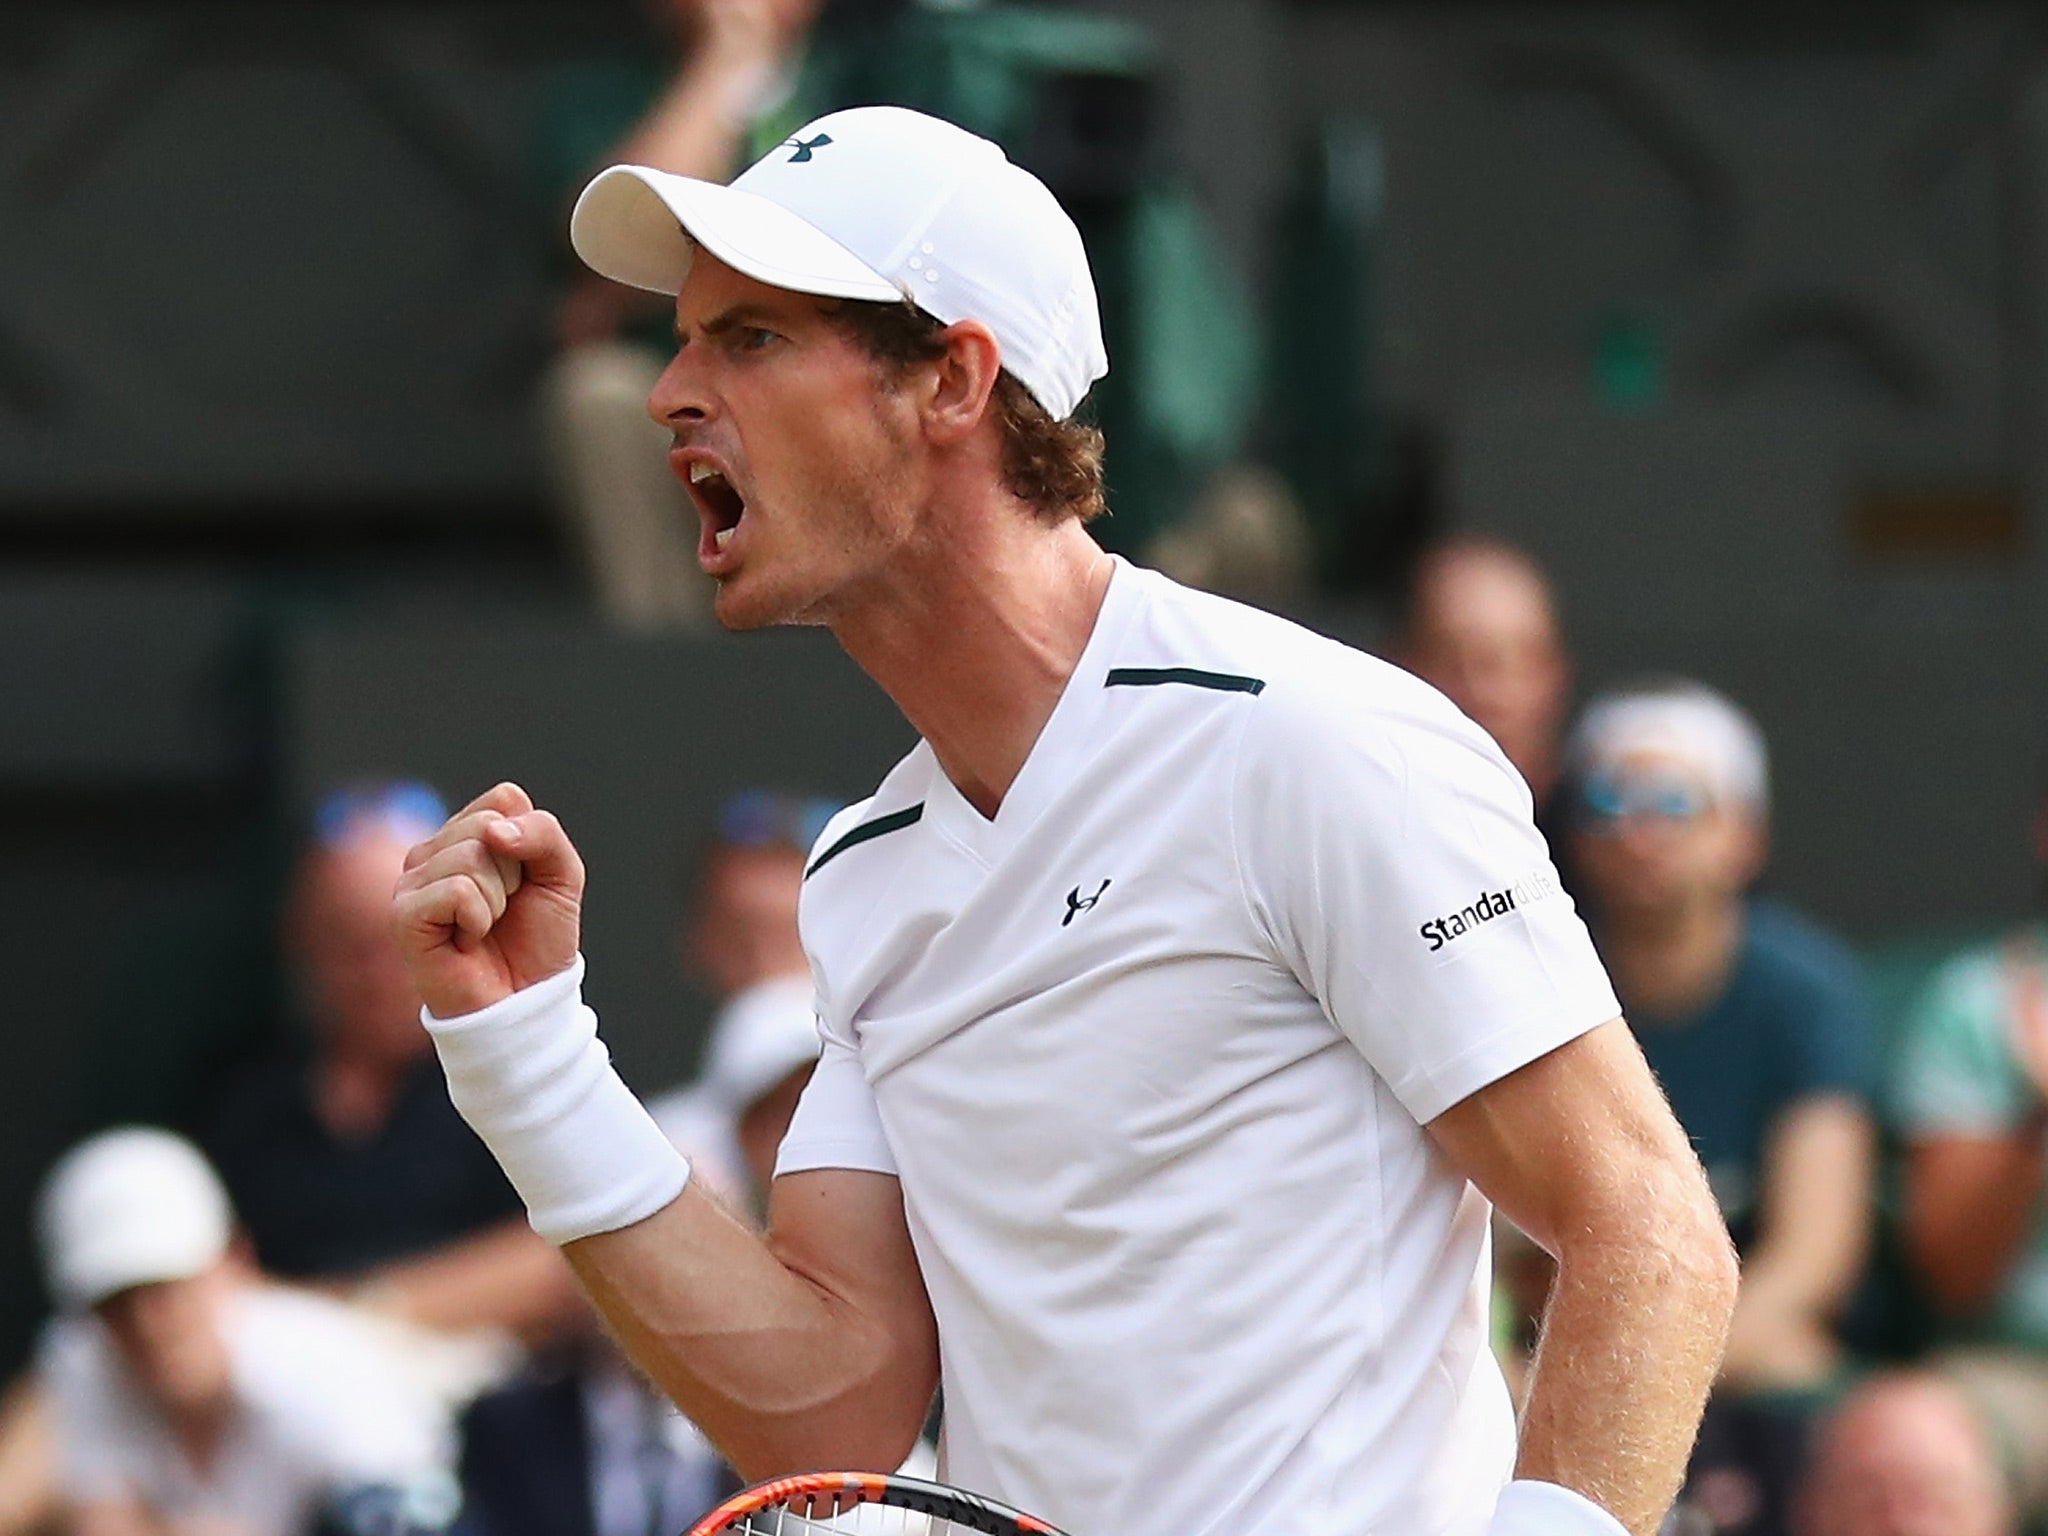 Andy Murray had to dig deep against the tenacious Fabio Fognini